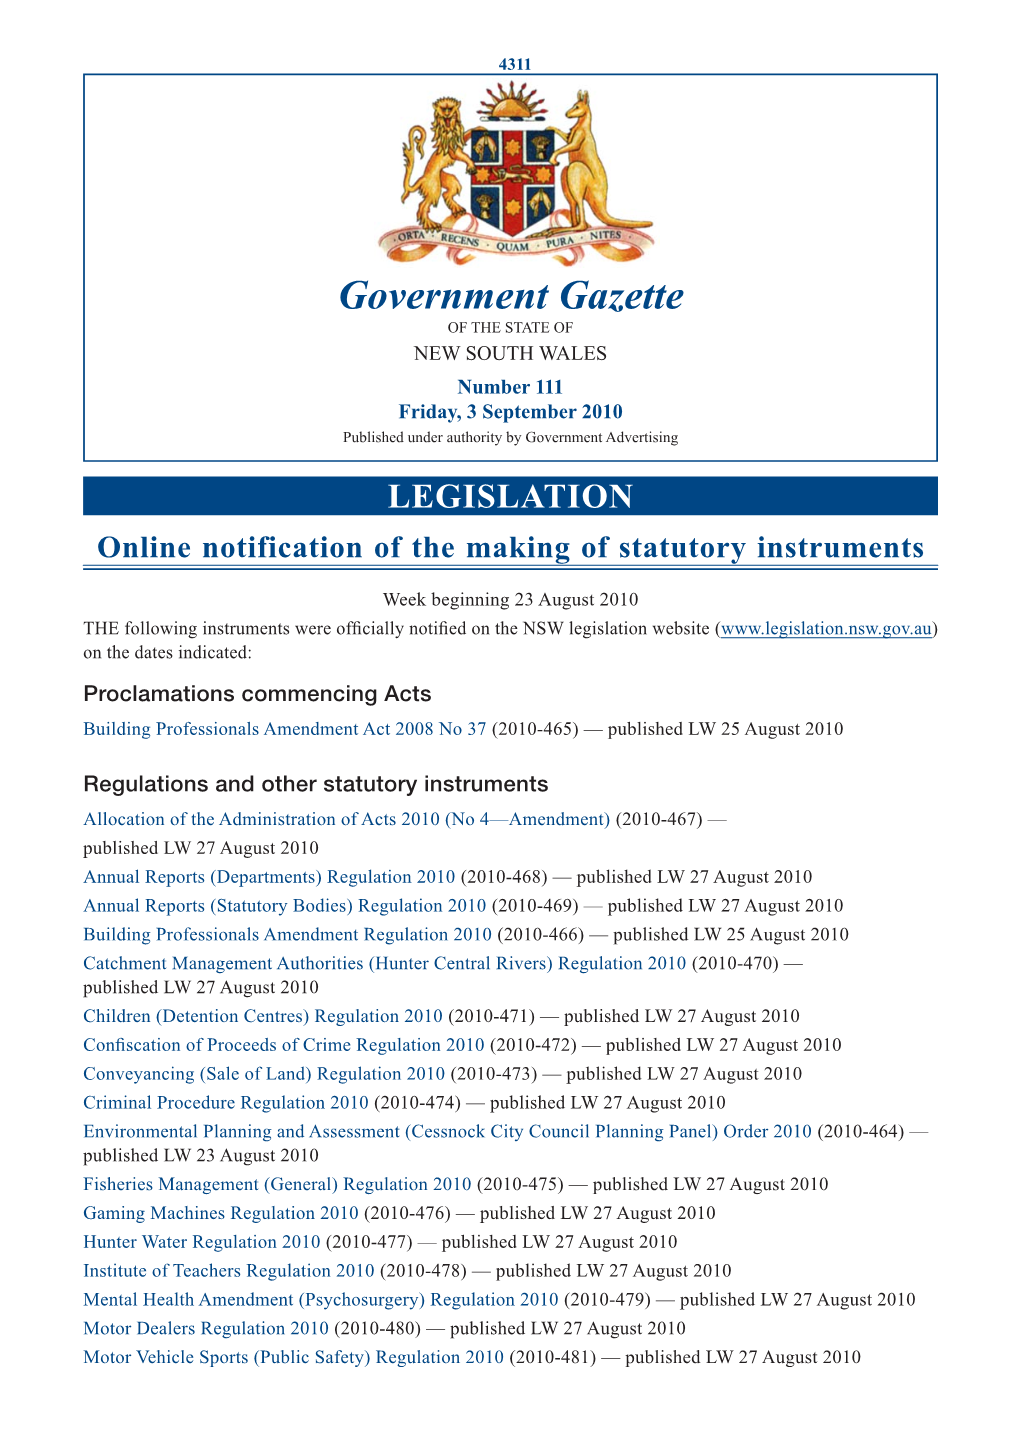 Government Gazette of the STATE of NEW SOUTH WALES Number 111 Friday, 3 September 2010 Published Under Authority by Government Advertising